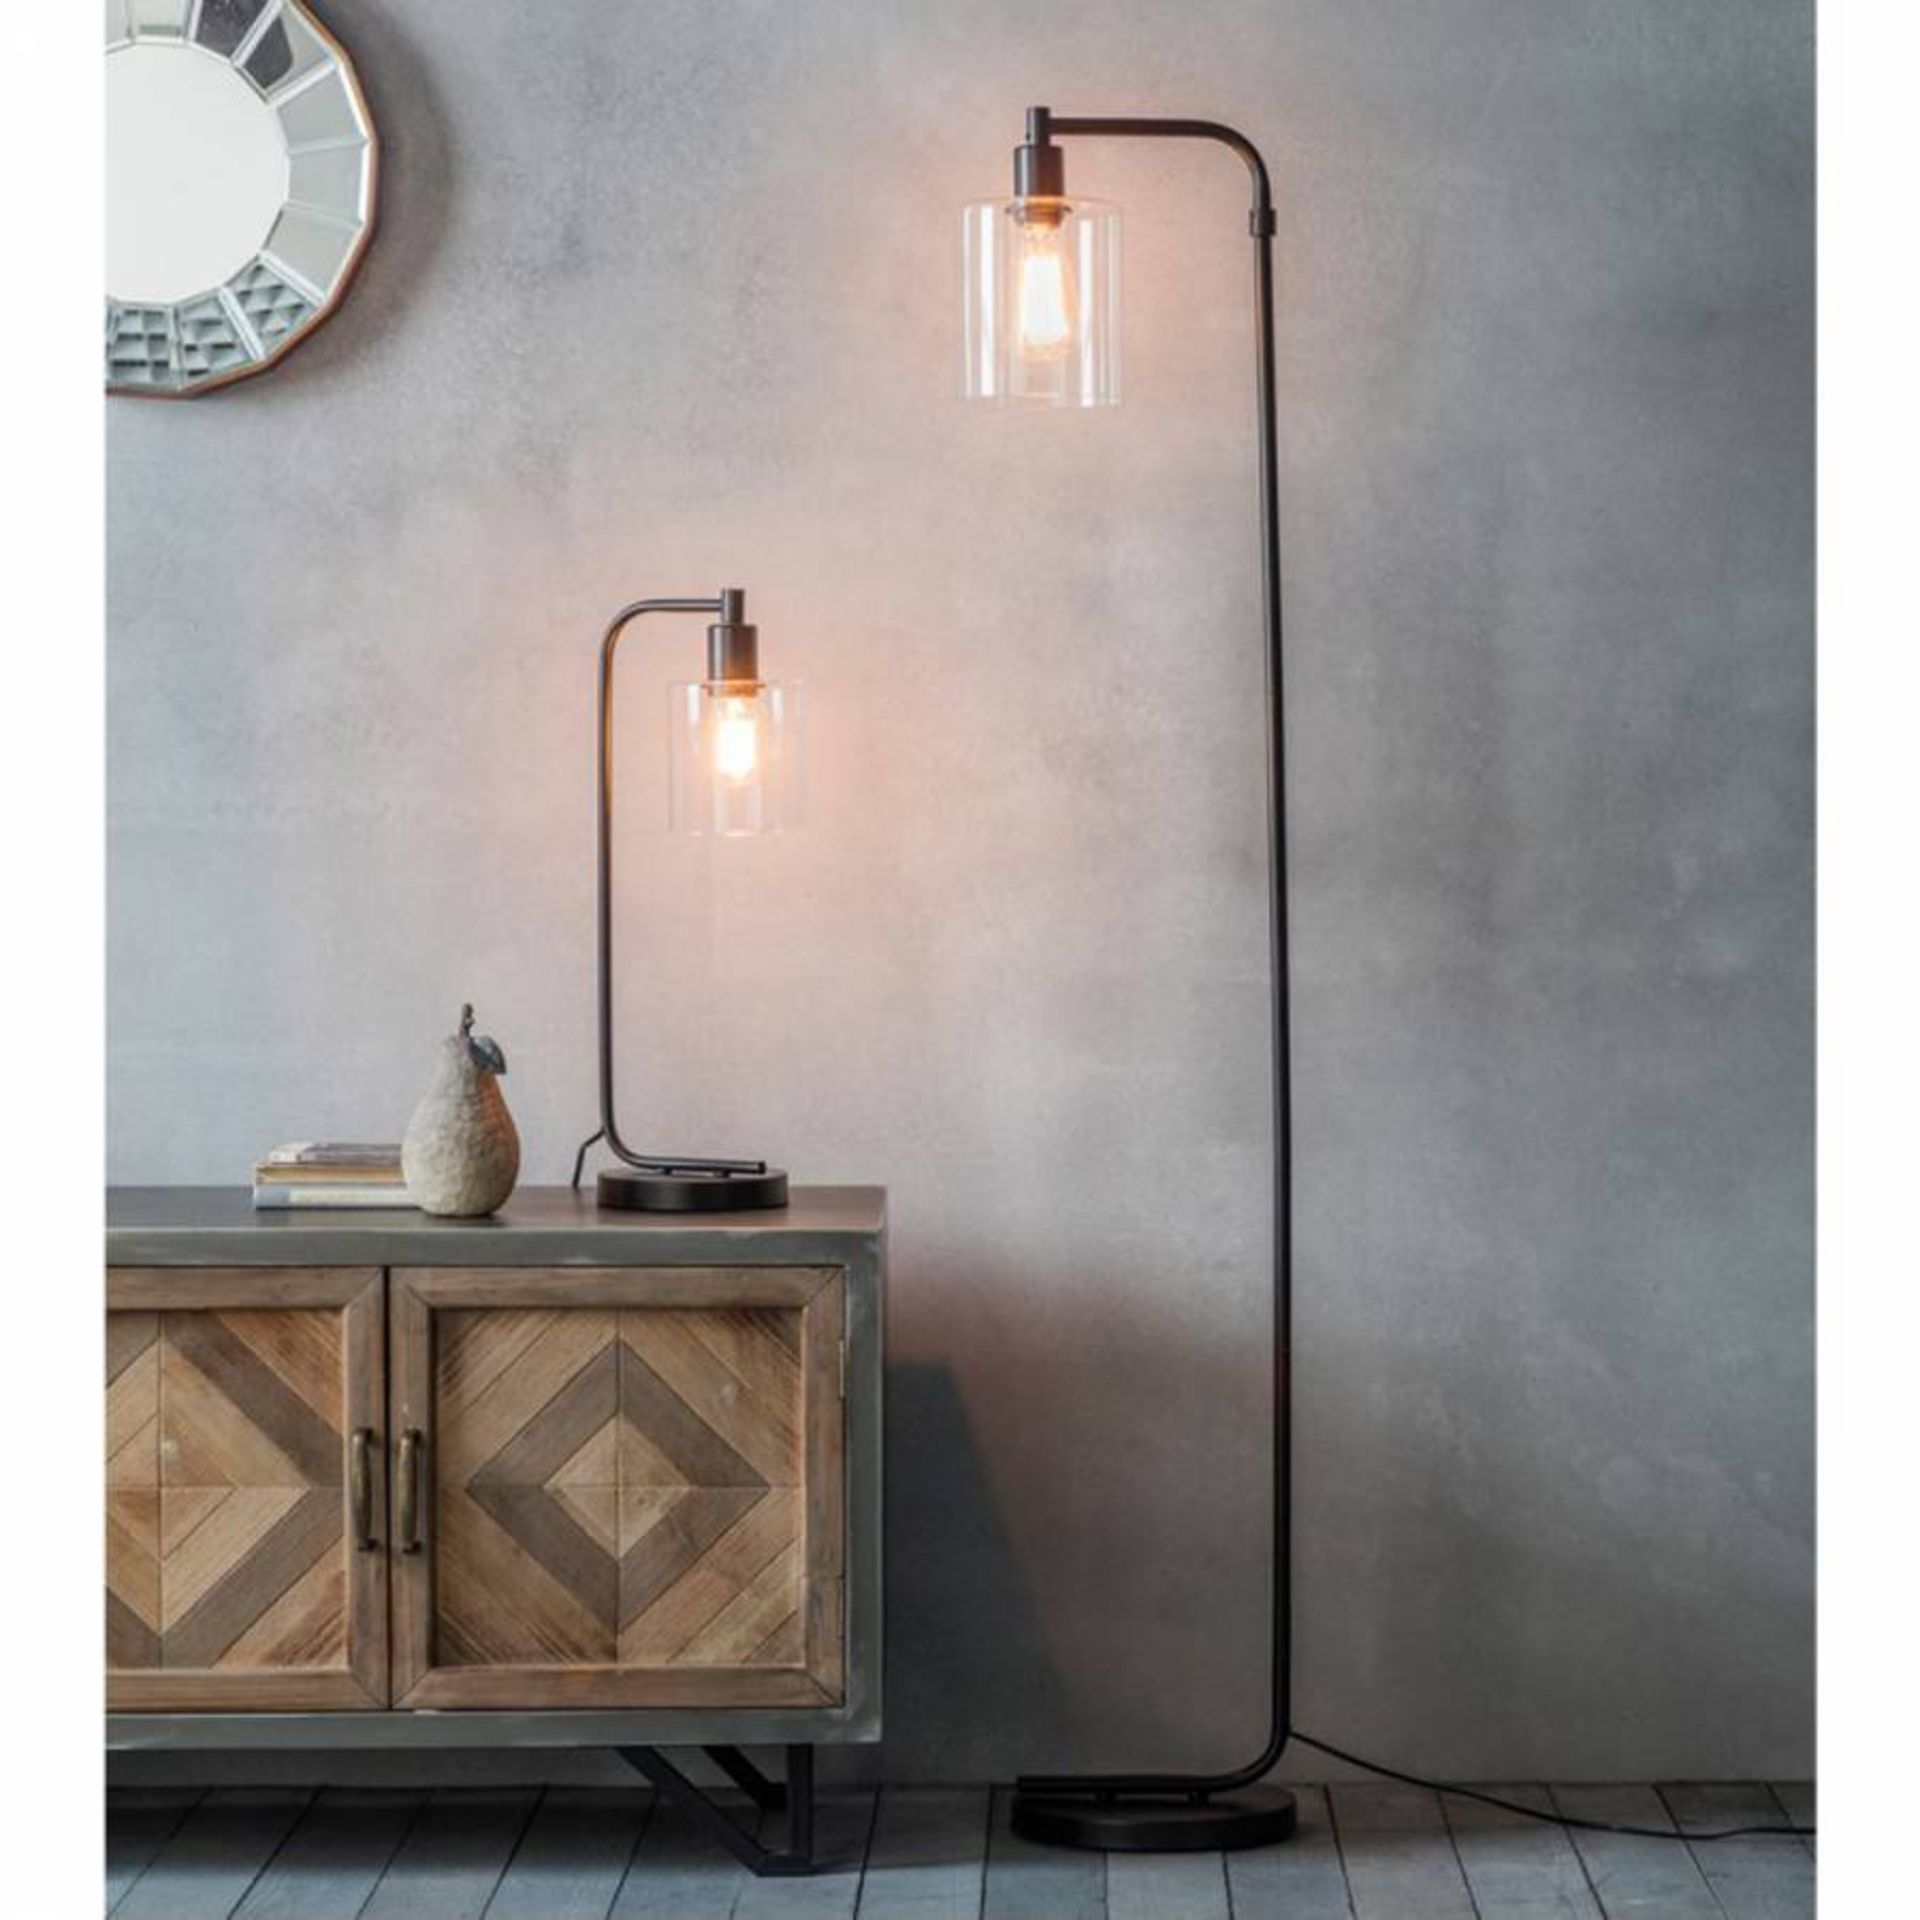 Chicago floor lamp black 250x280x1520mm The Chicago is a fabulous industrial style freestanding